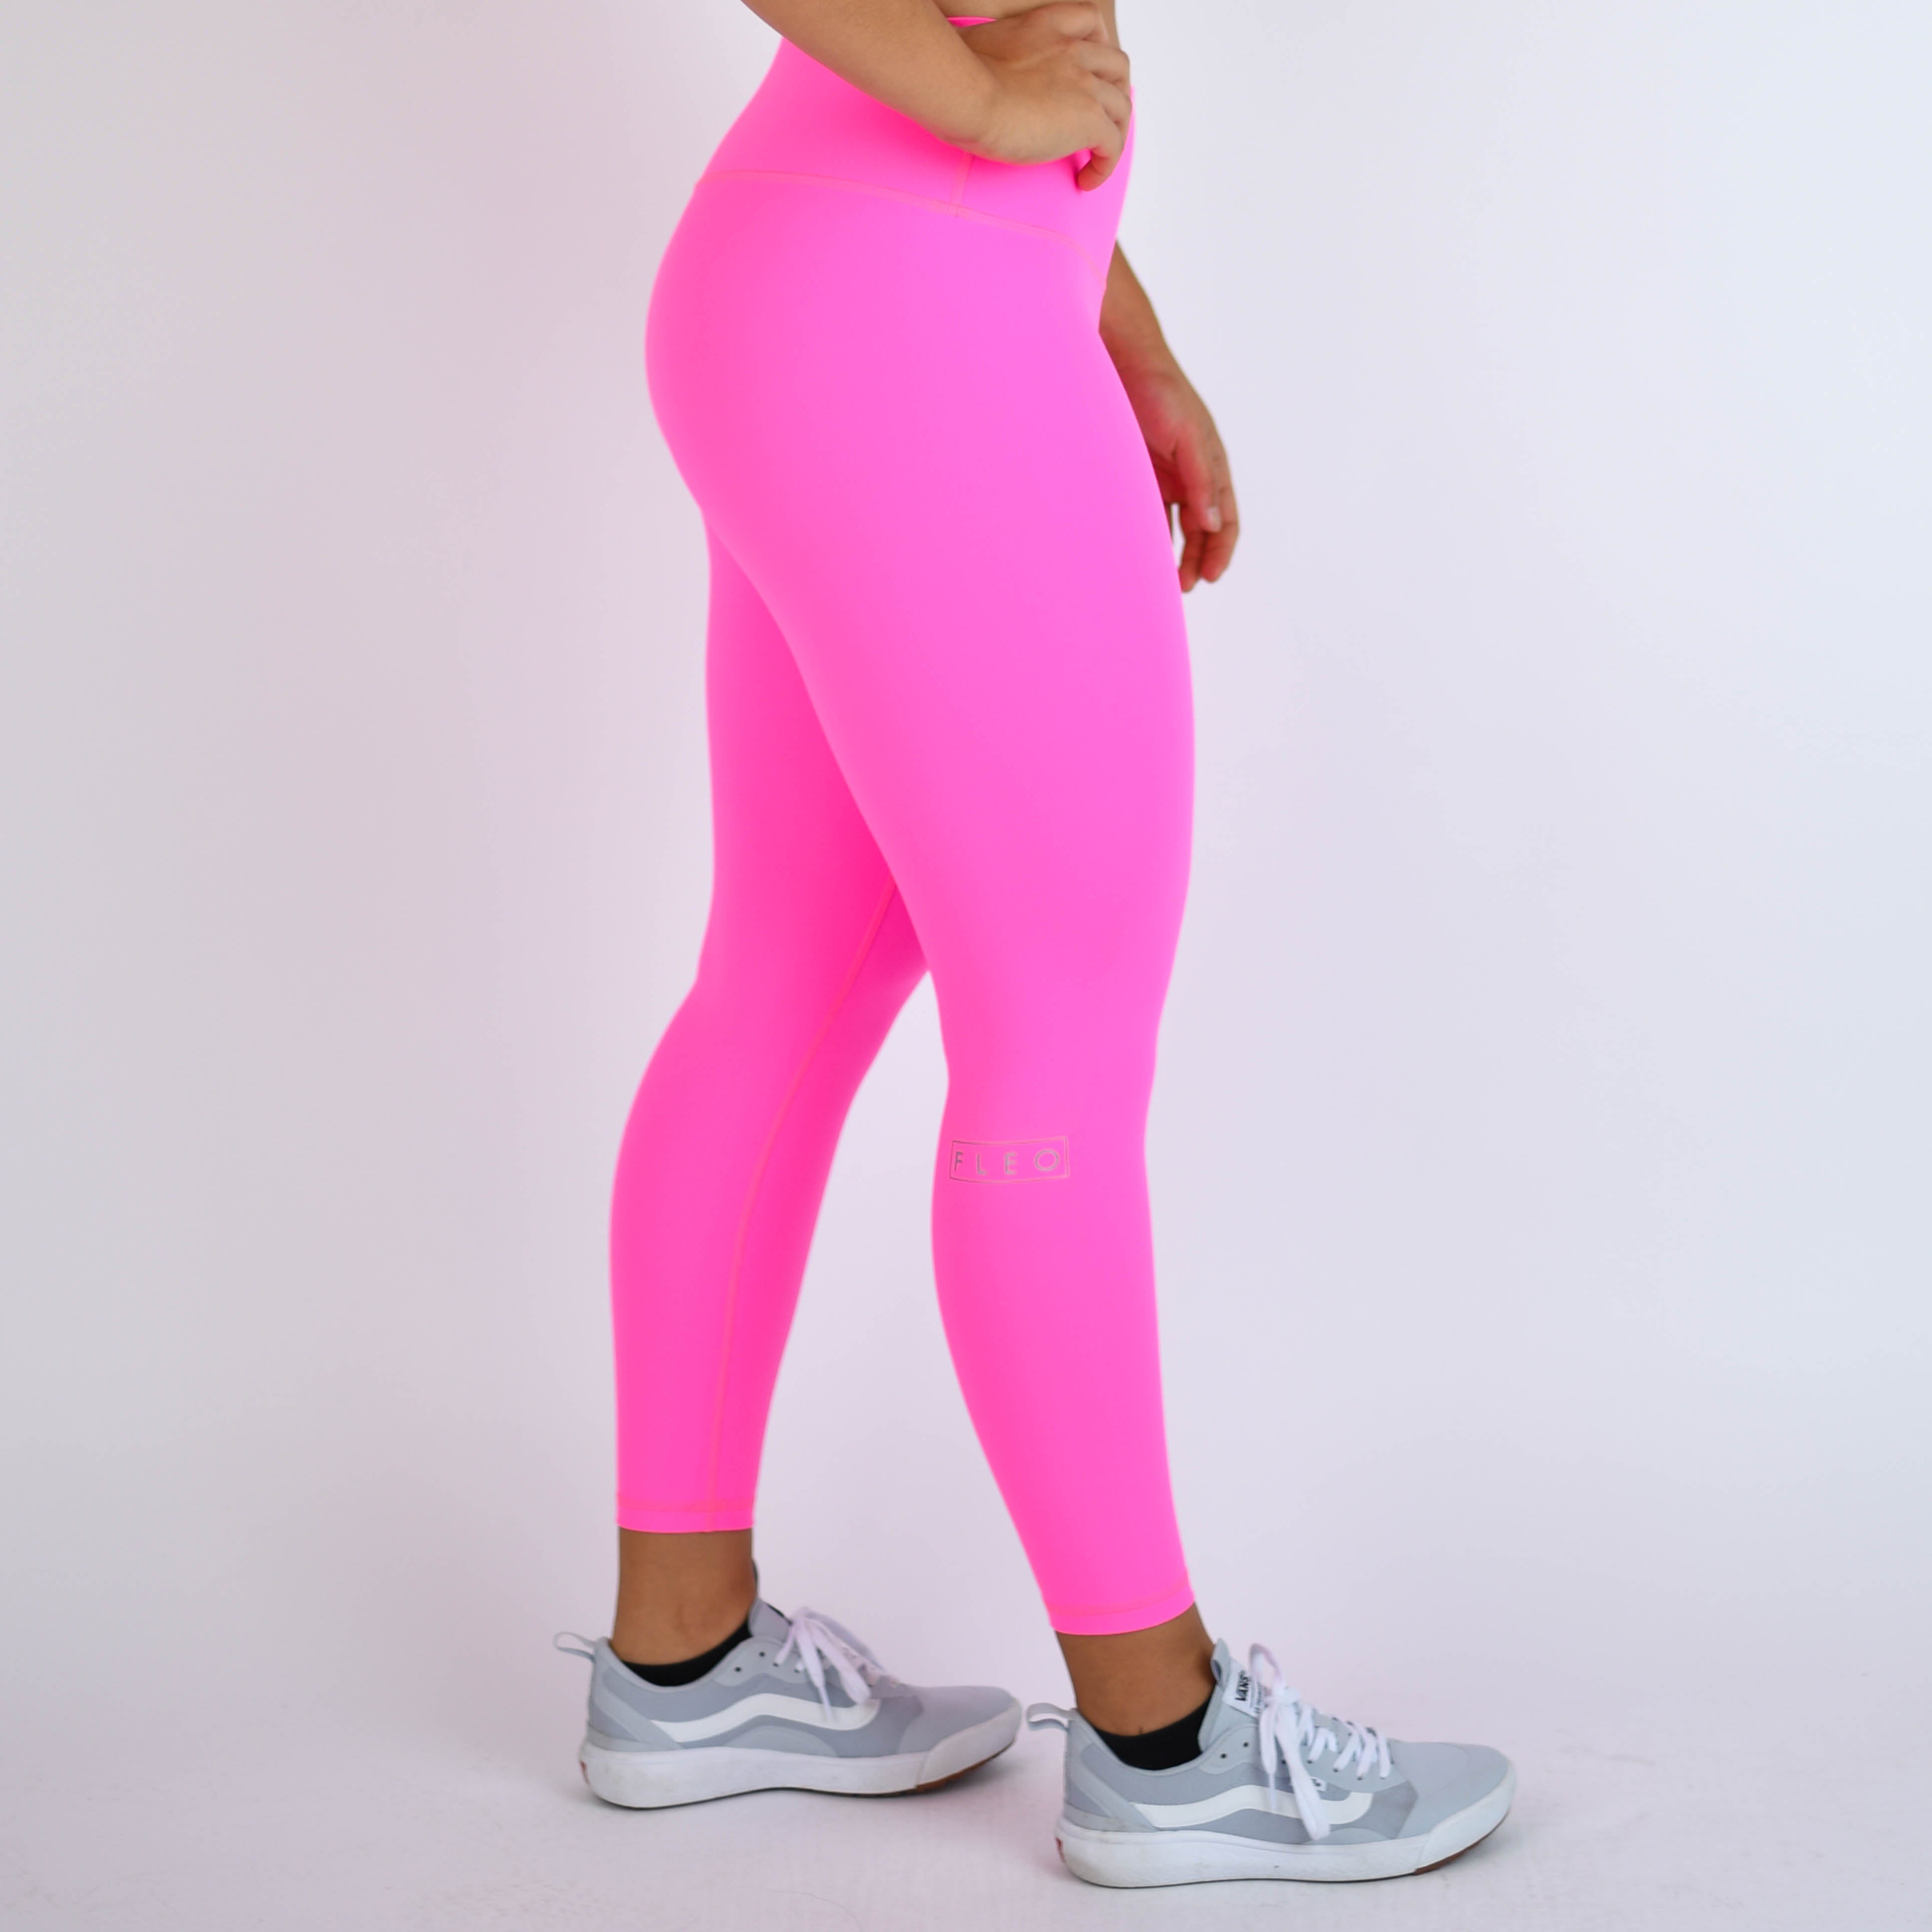 Valiente Techno stretch pants long in pink buy online - Golf House